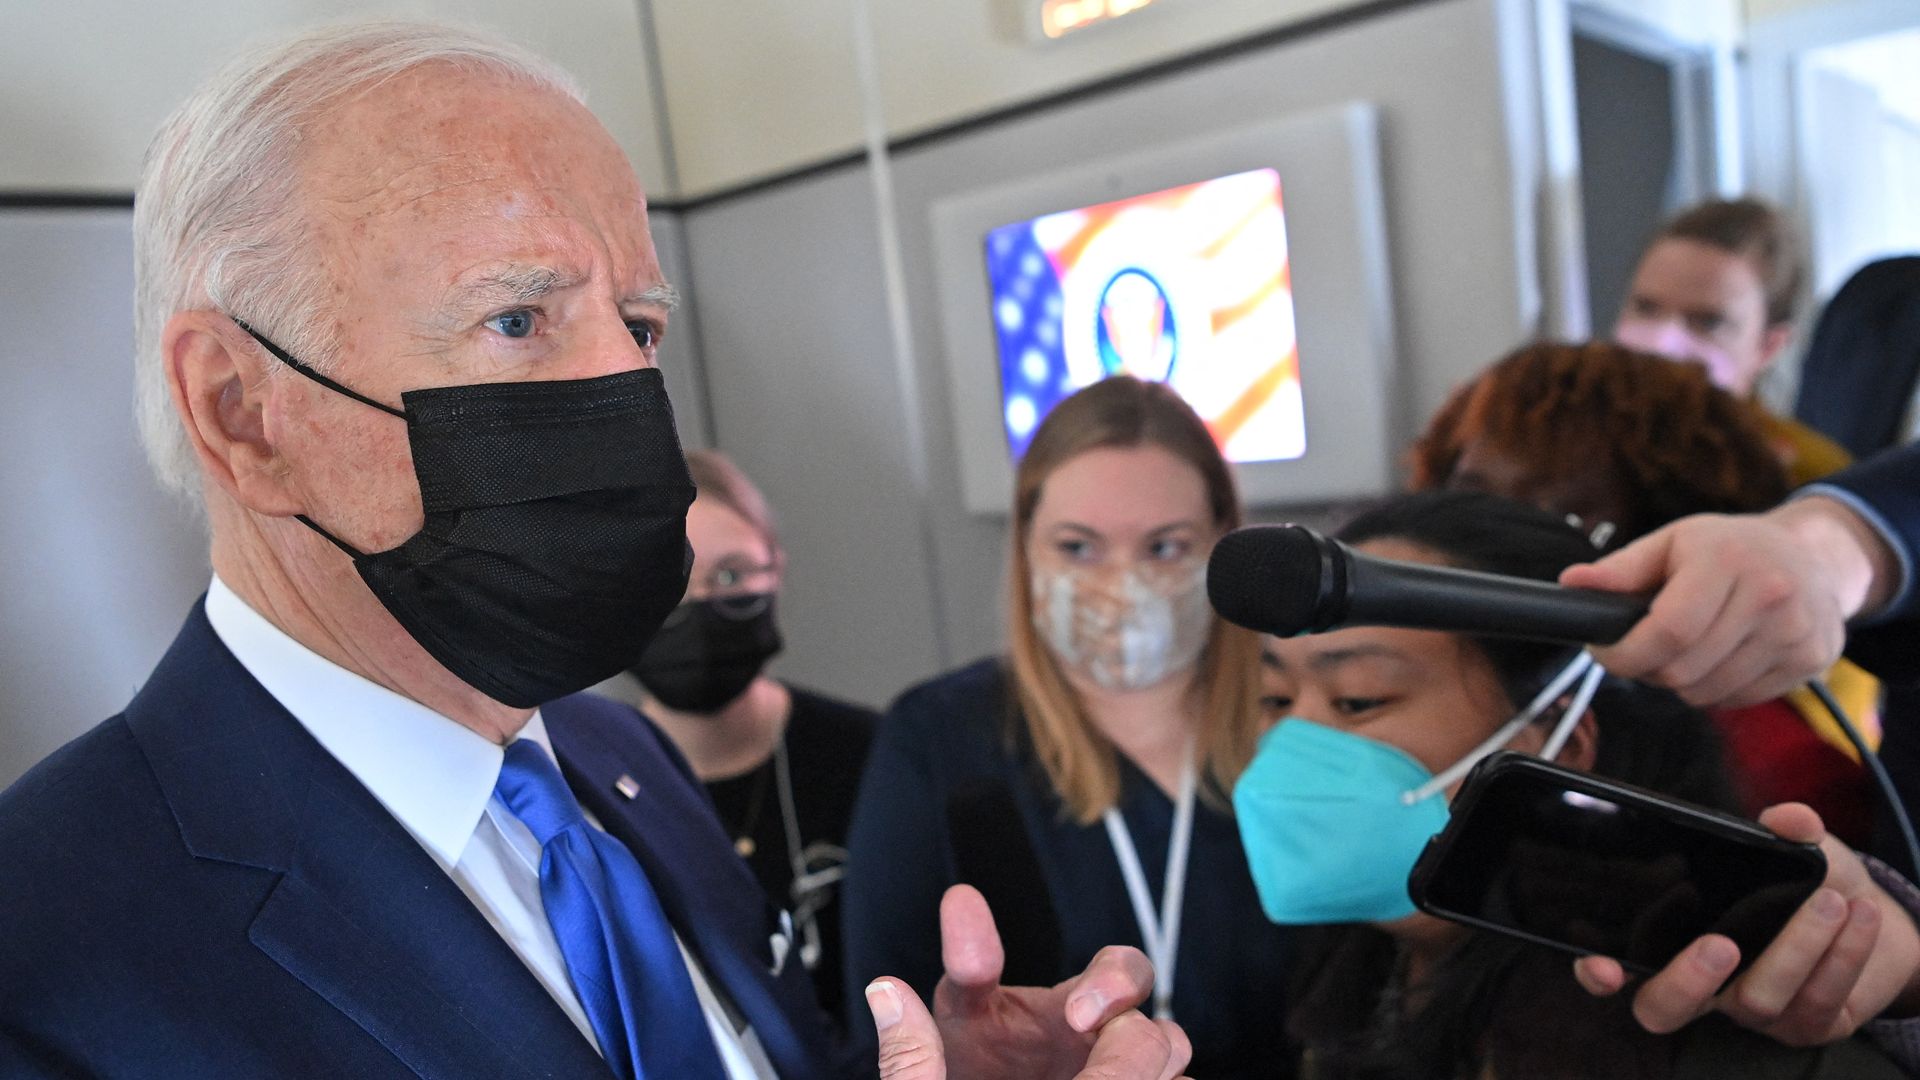 President Biden is seen speaking with reporters in the press cabin aboard Air Force One.